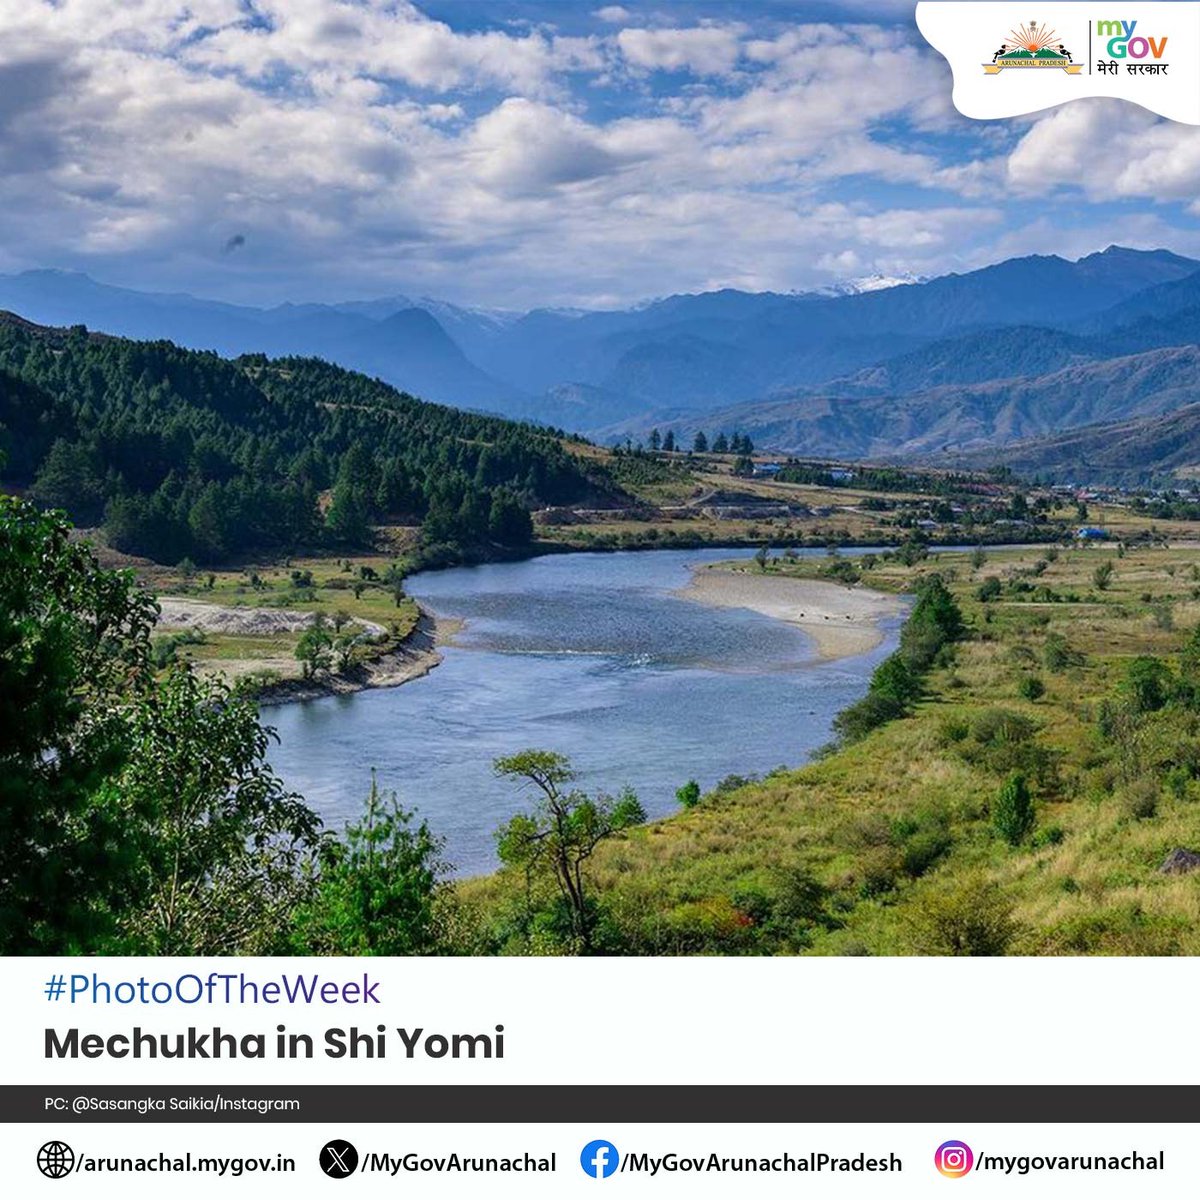 #PhotoOfTheWeek

Immerse yourself in Mechukha, nestled amidst stunning mountains and lush valleys in the captivating Shi Yomi District. Explore its rich cultural heritage for an unforgettable journey, blending nature's grandeur with cultural treasures & creating lasting memories.